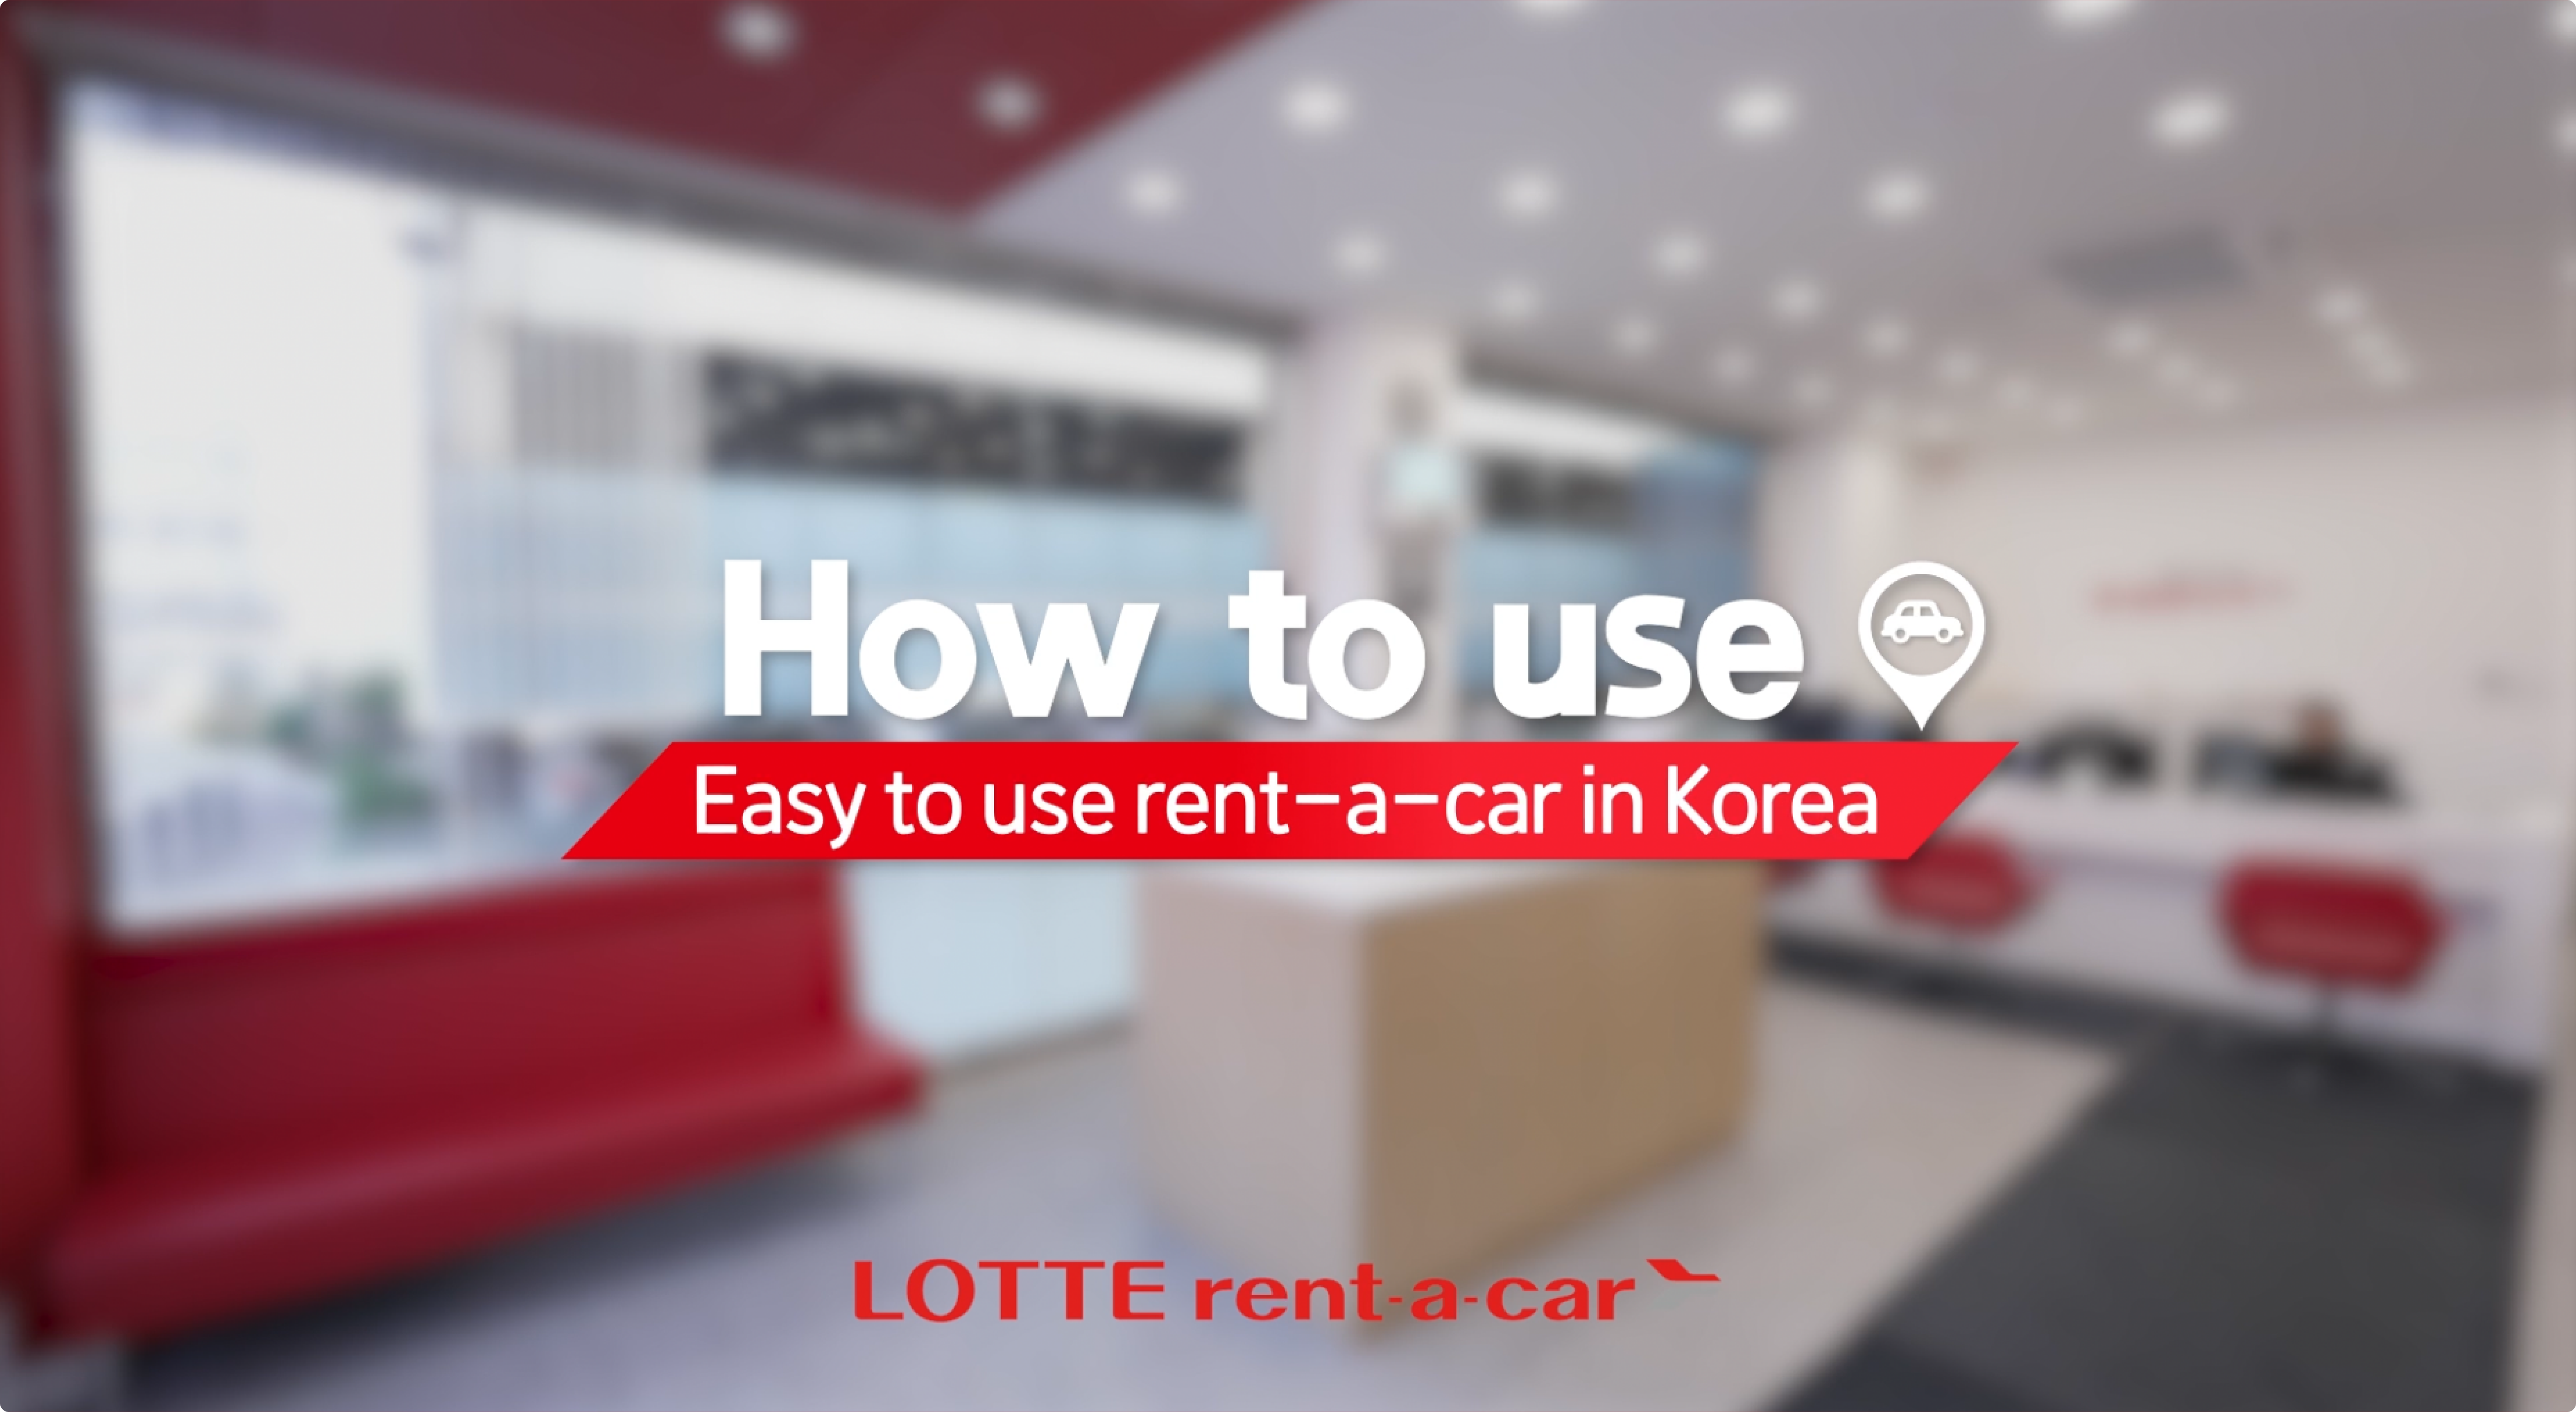 Easy to Use Rent-a-car in Korea